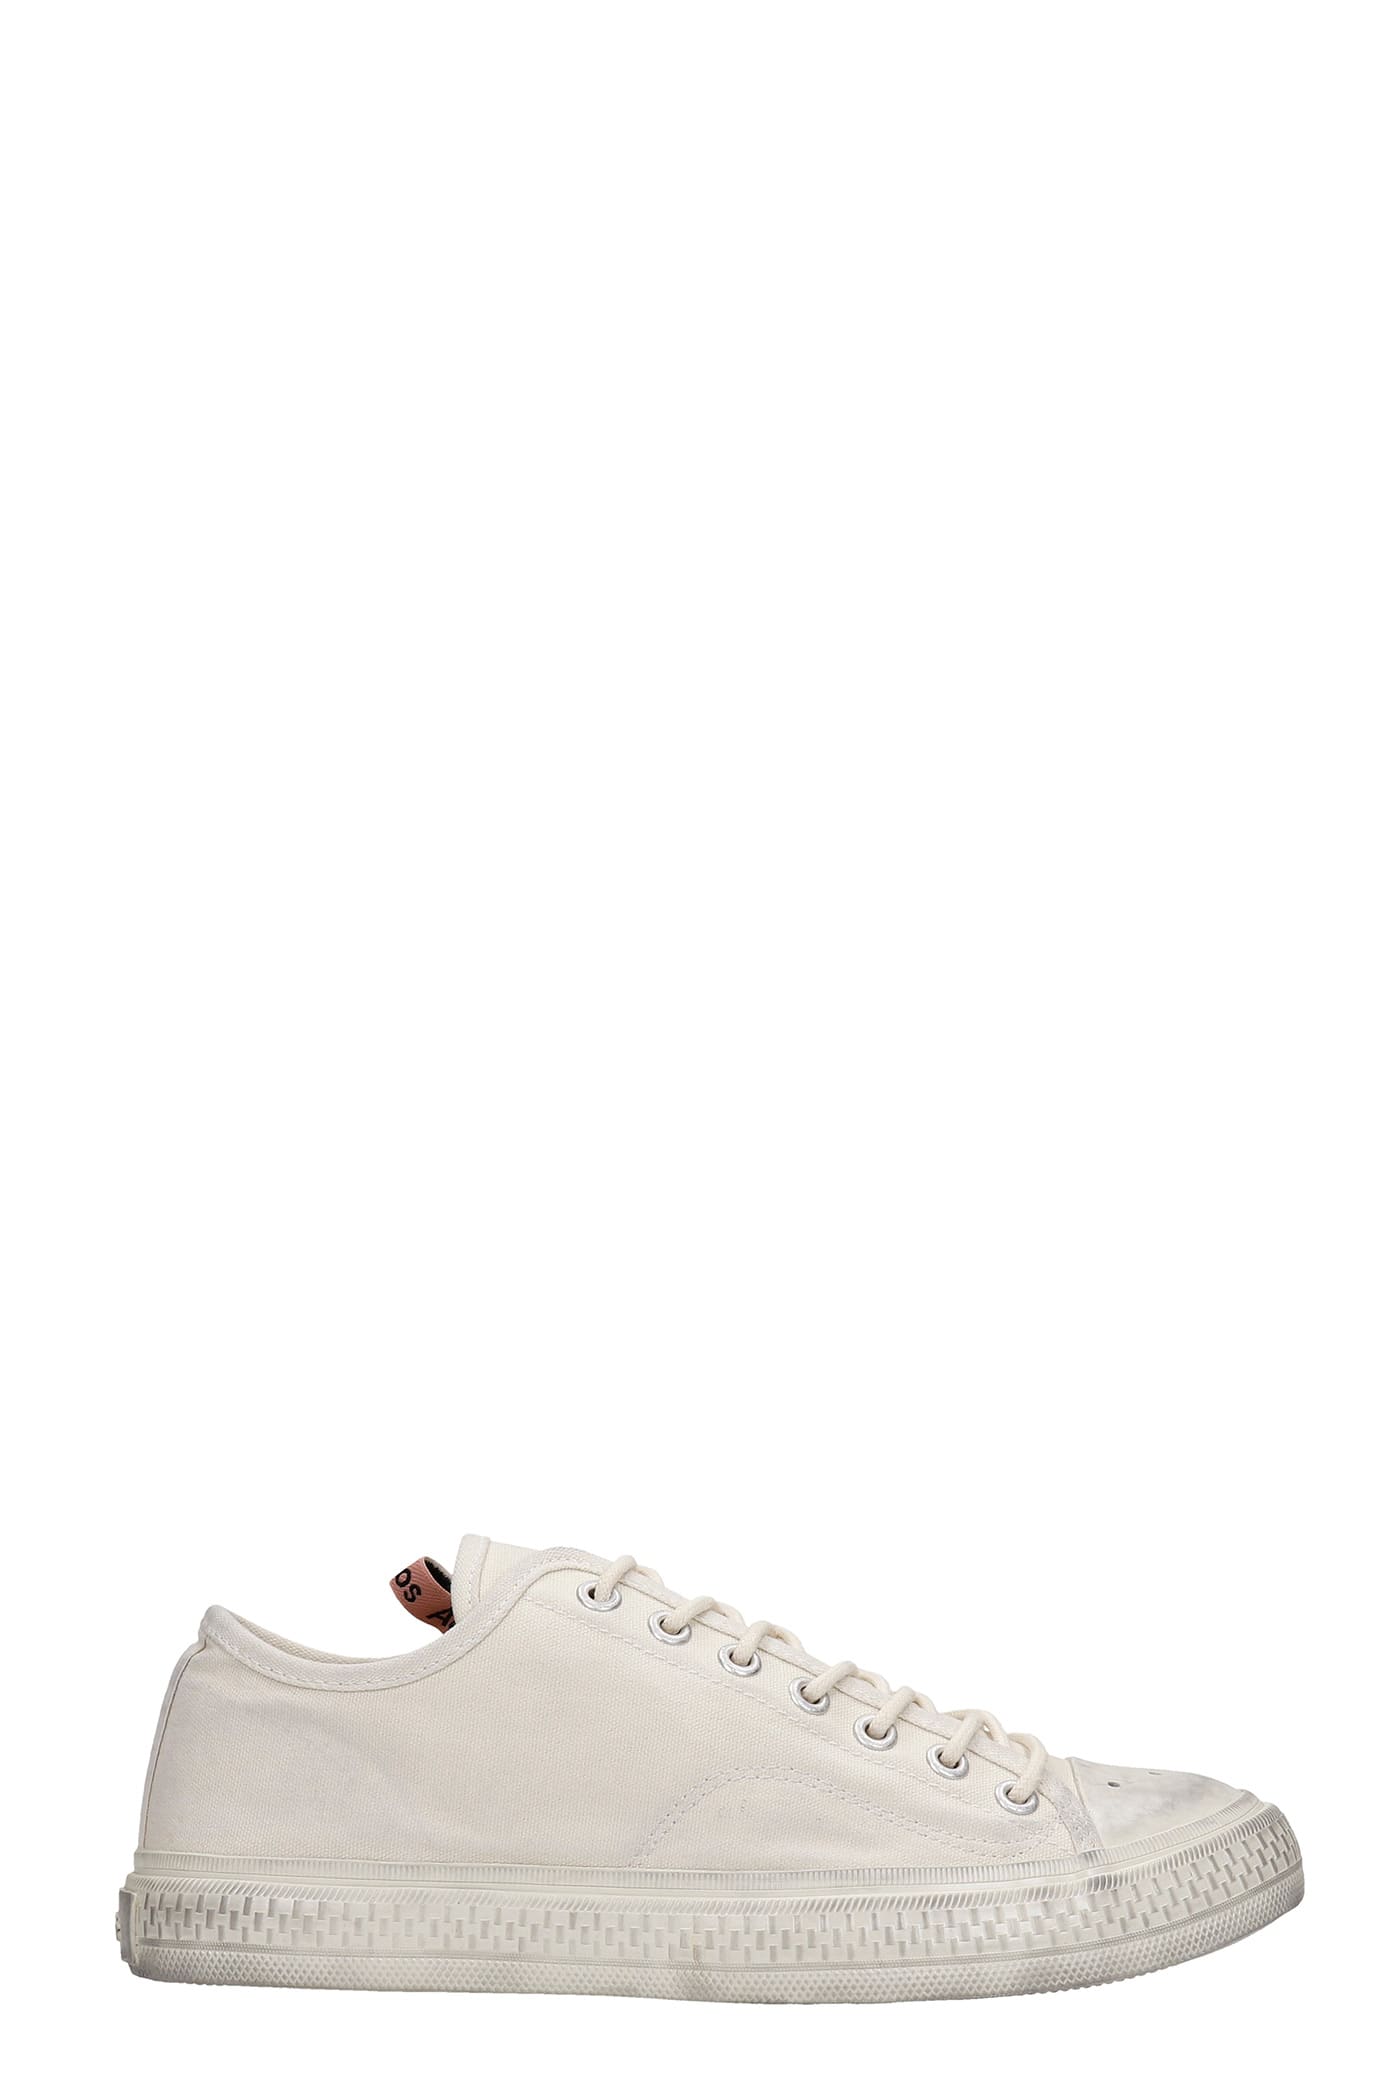 Acne Studios Ballow Tumbled Sneakers In Beige Canvas